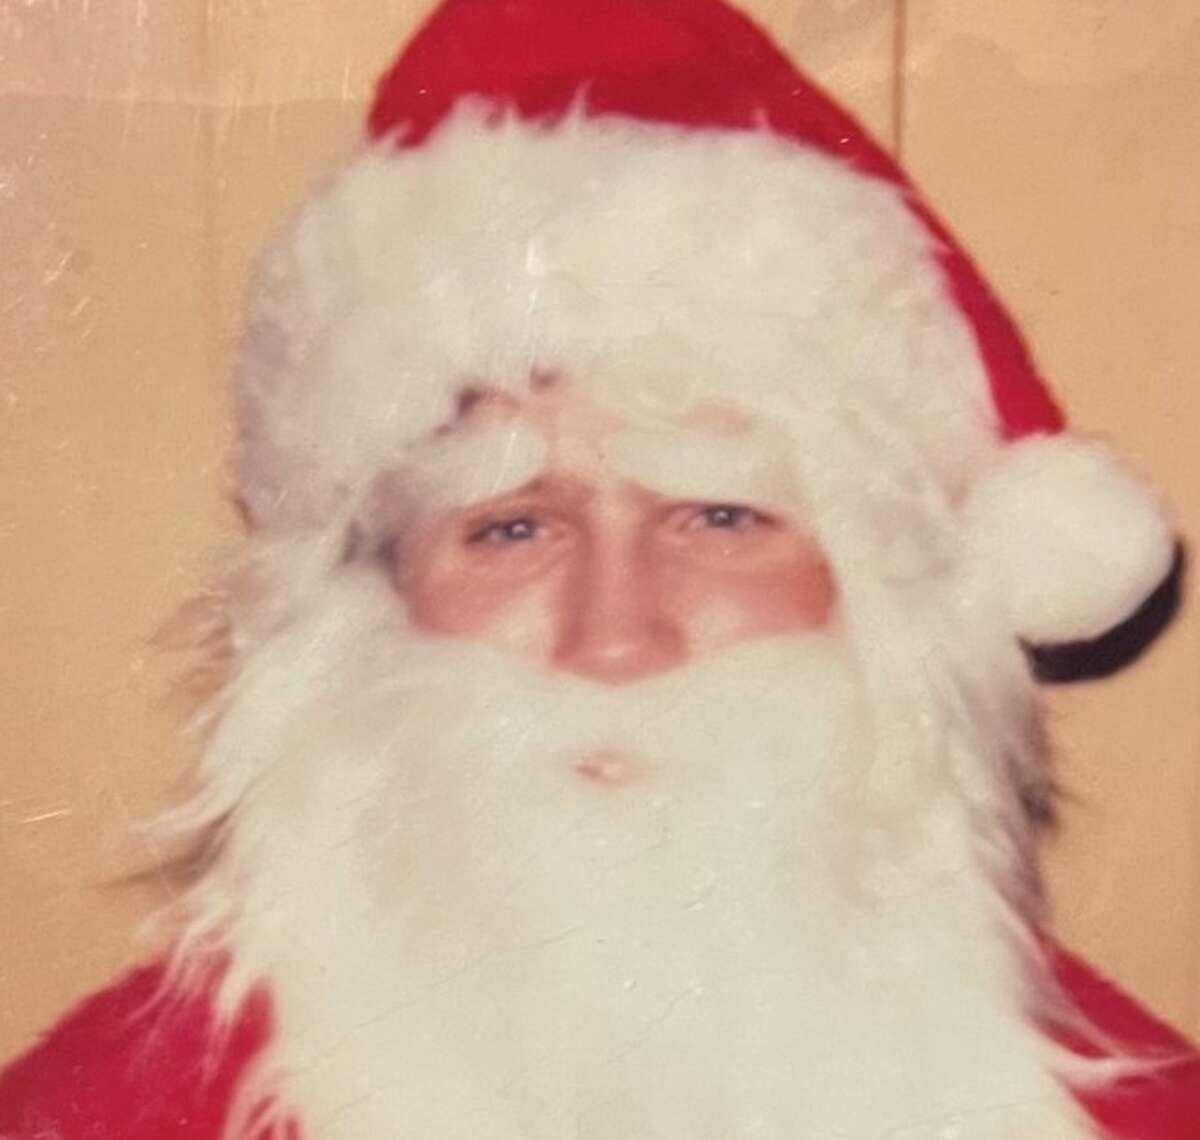 A 14-year-old David Lipe, now 55, dressed as Santa Clause for Granite City North High School. Students could get their photo taken with Santa for $1. His mom has saved this image all these years.